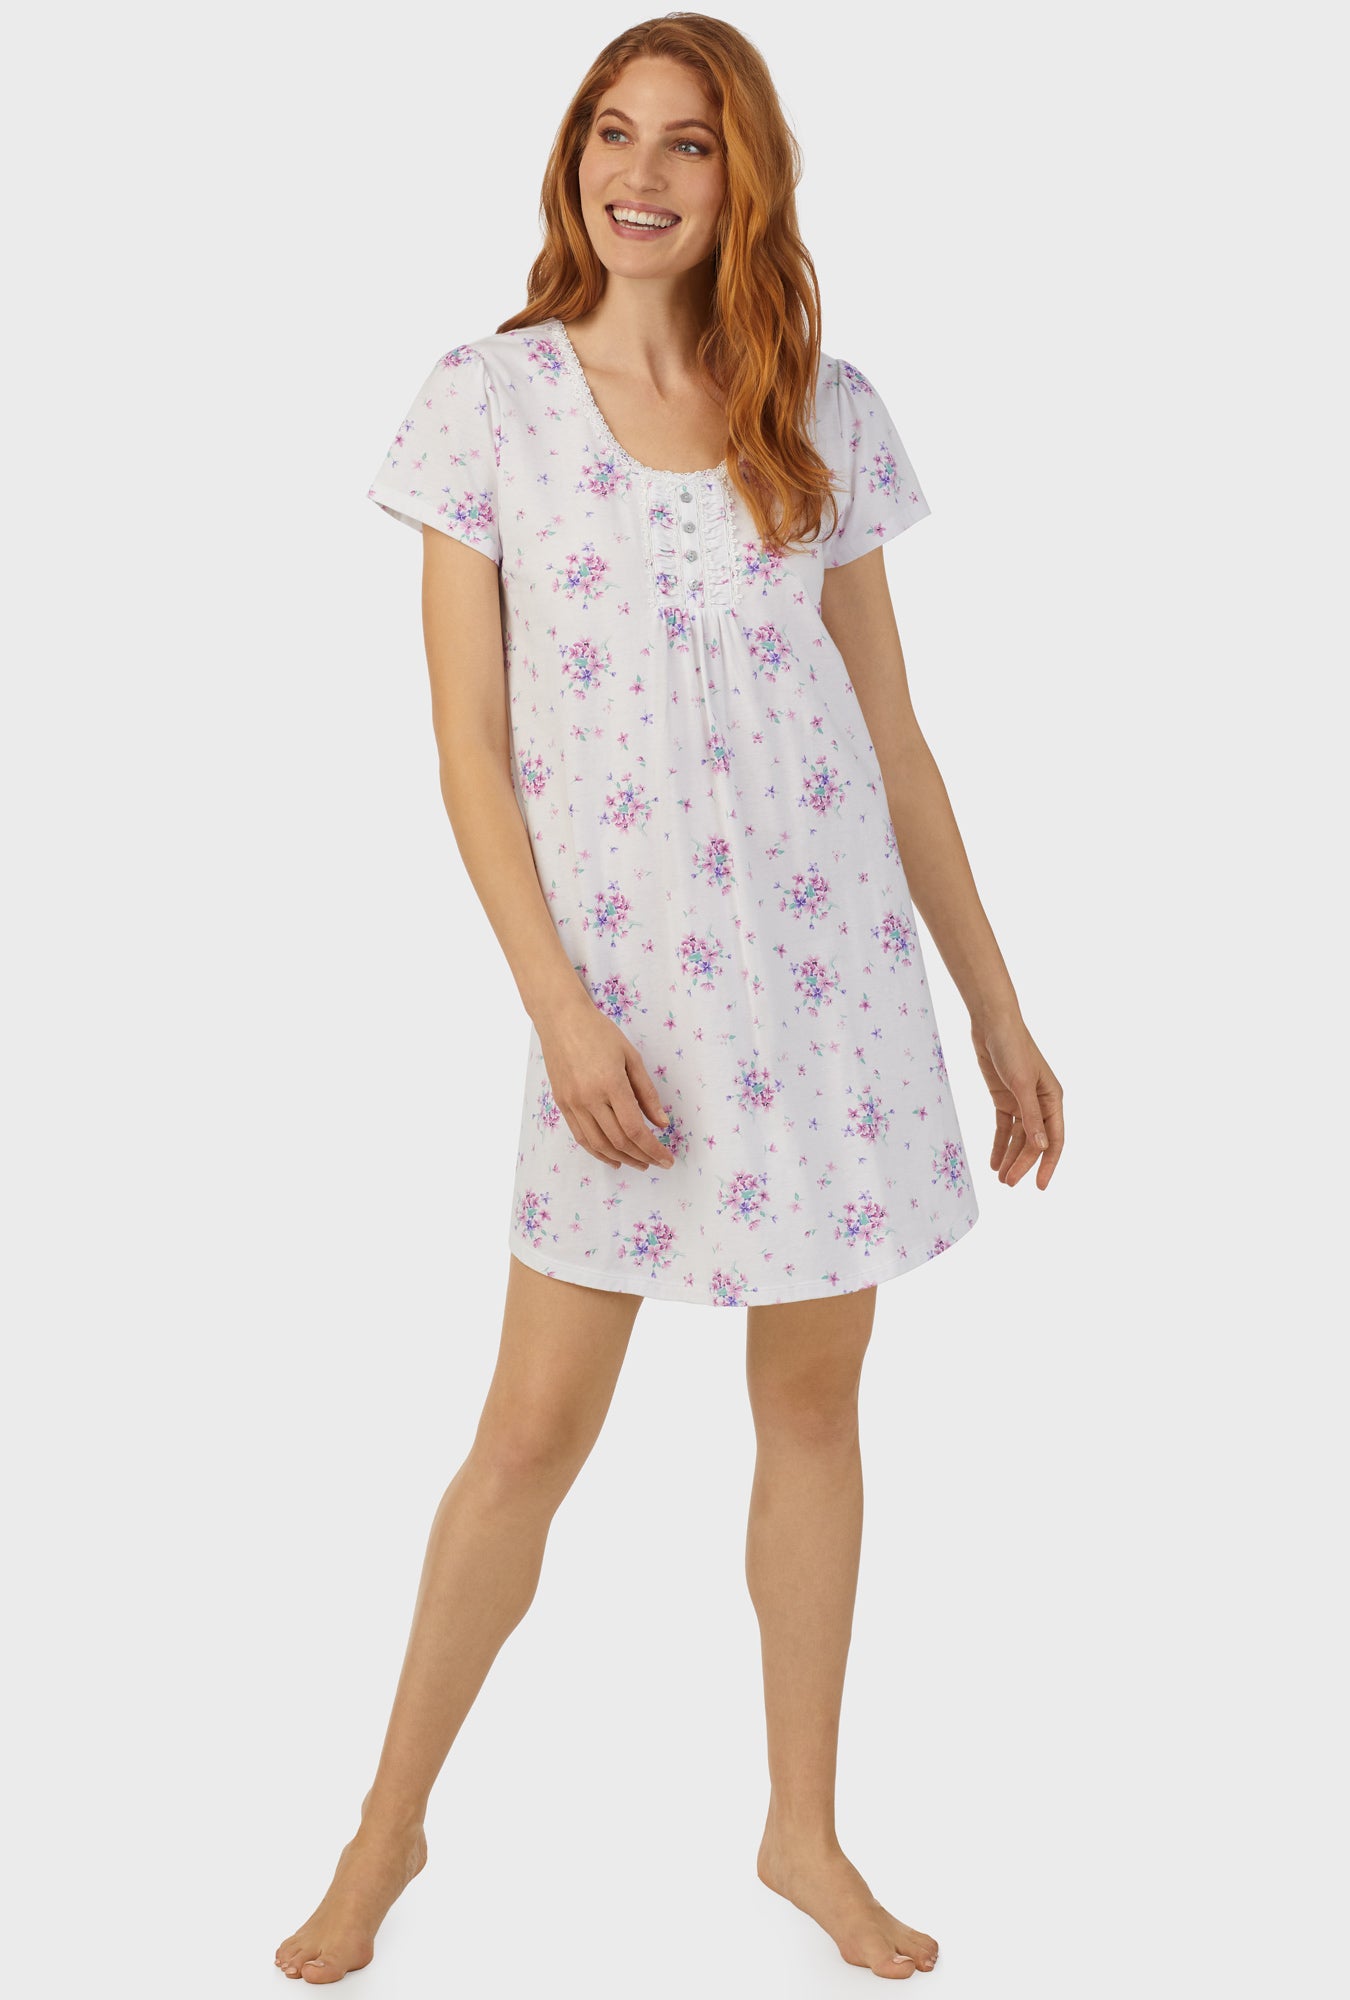 A lady wearing white cap sleeve nightshirt  with mulberry purple floral print bouquet.